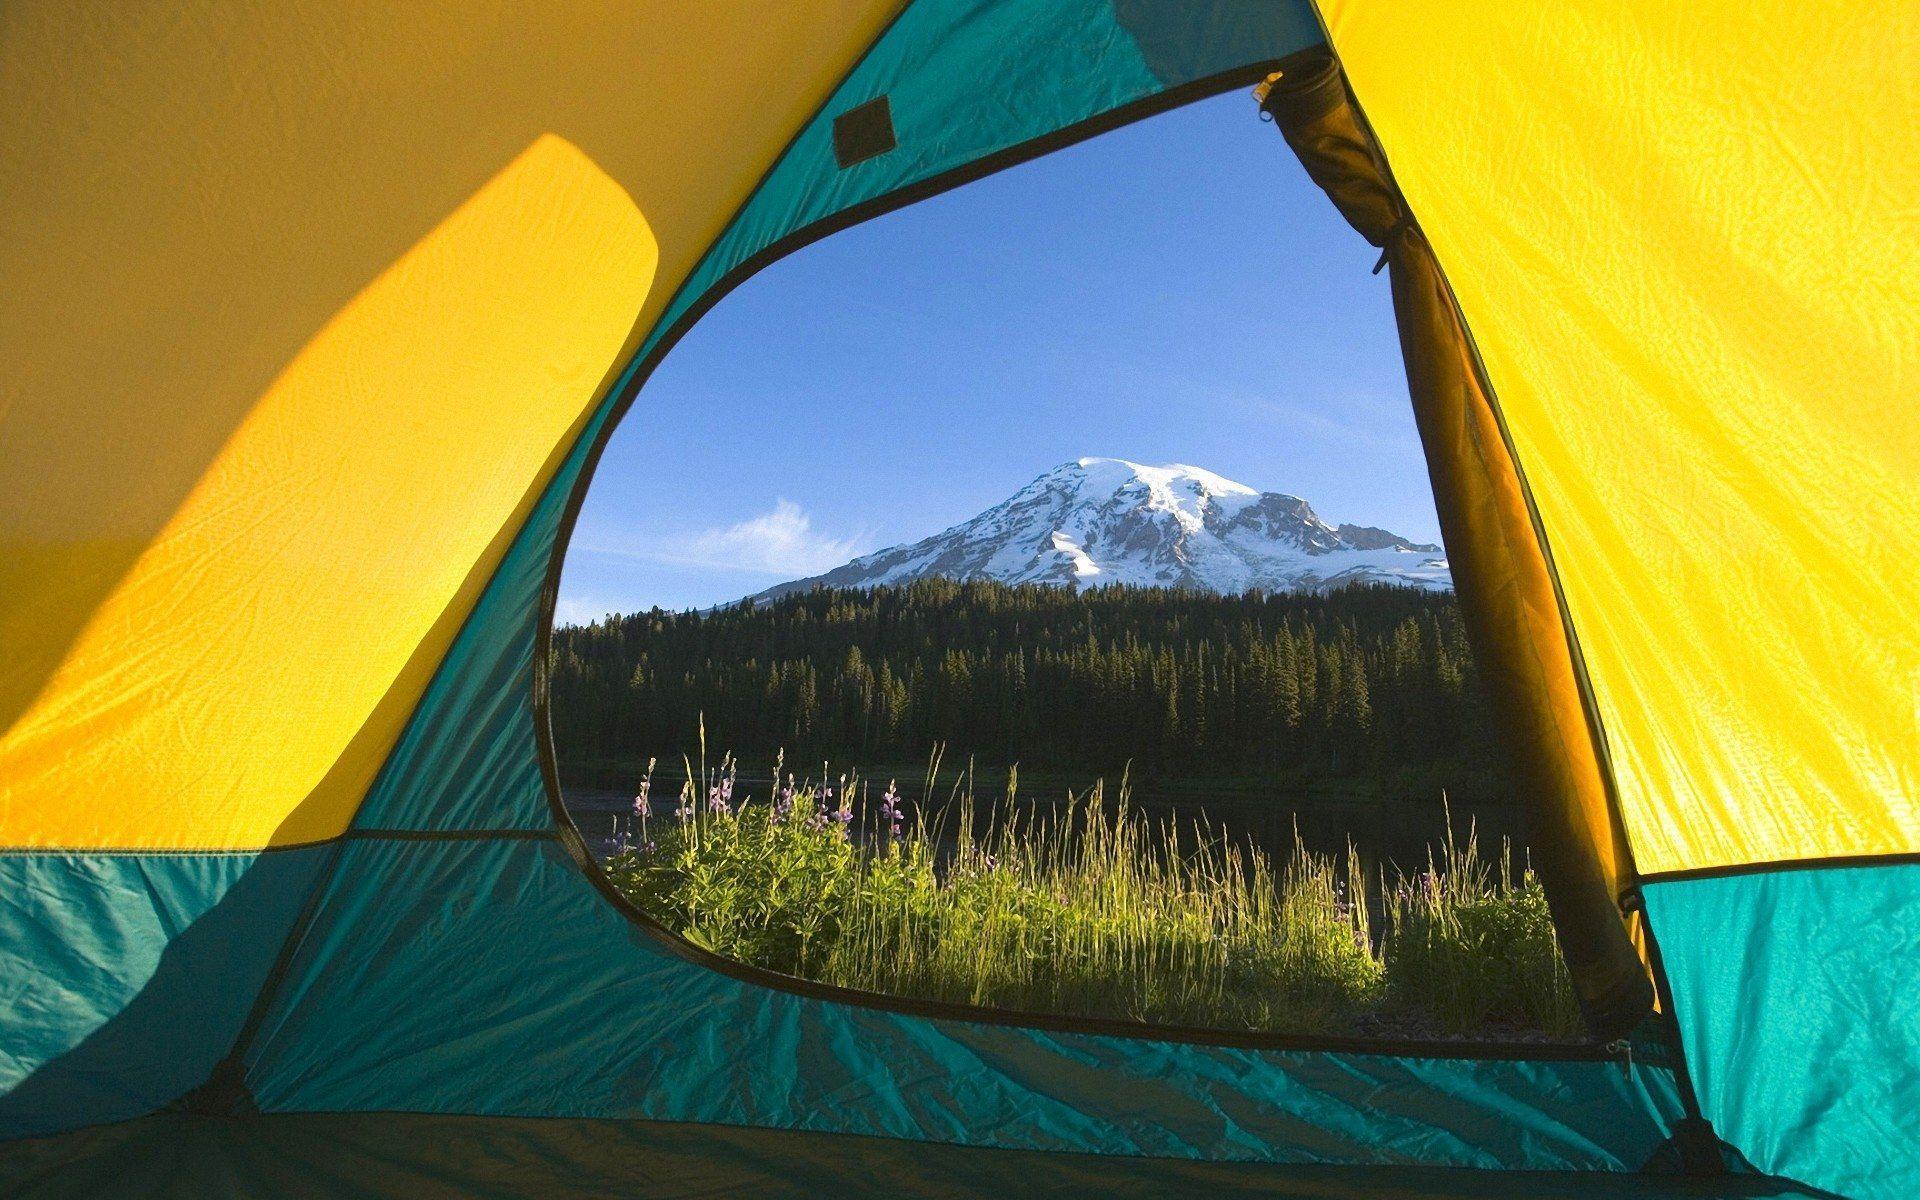 Camping Wallpaper, FHDQ Camping Background ZZR